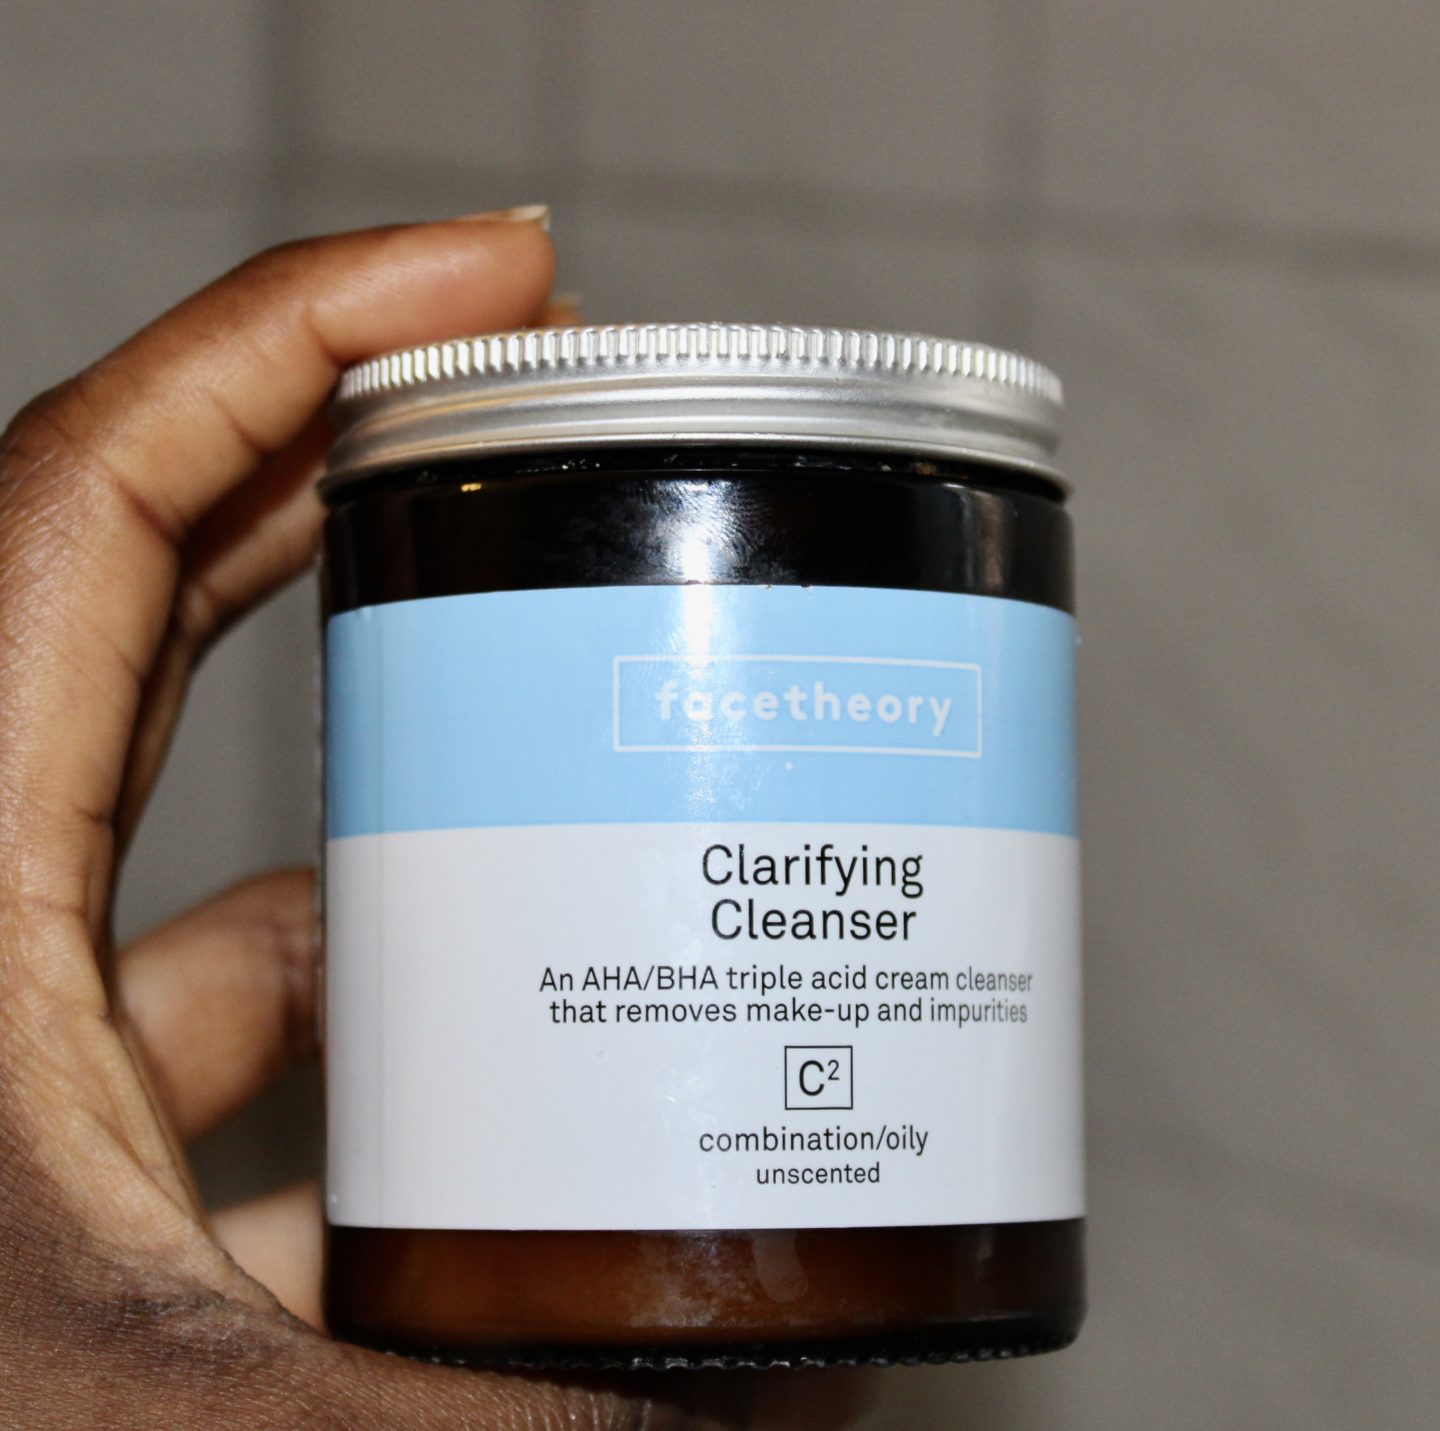 Facetheory-Clarifuing cleanser